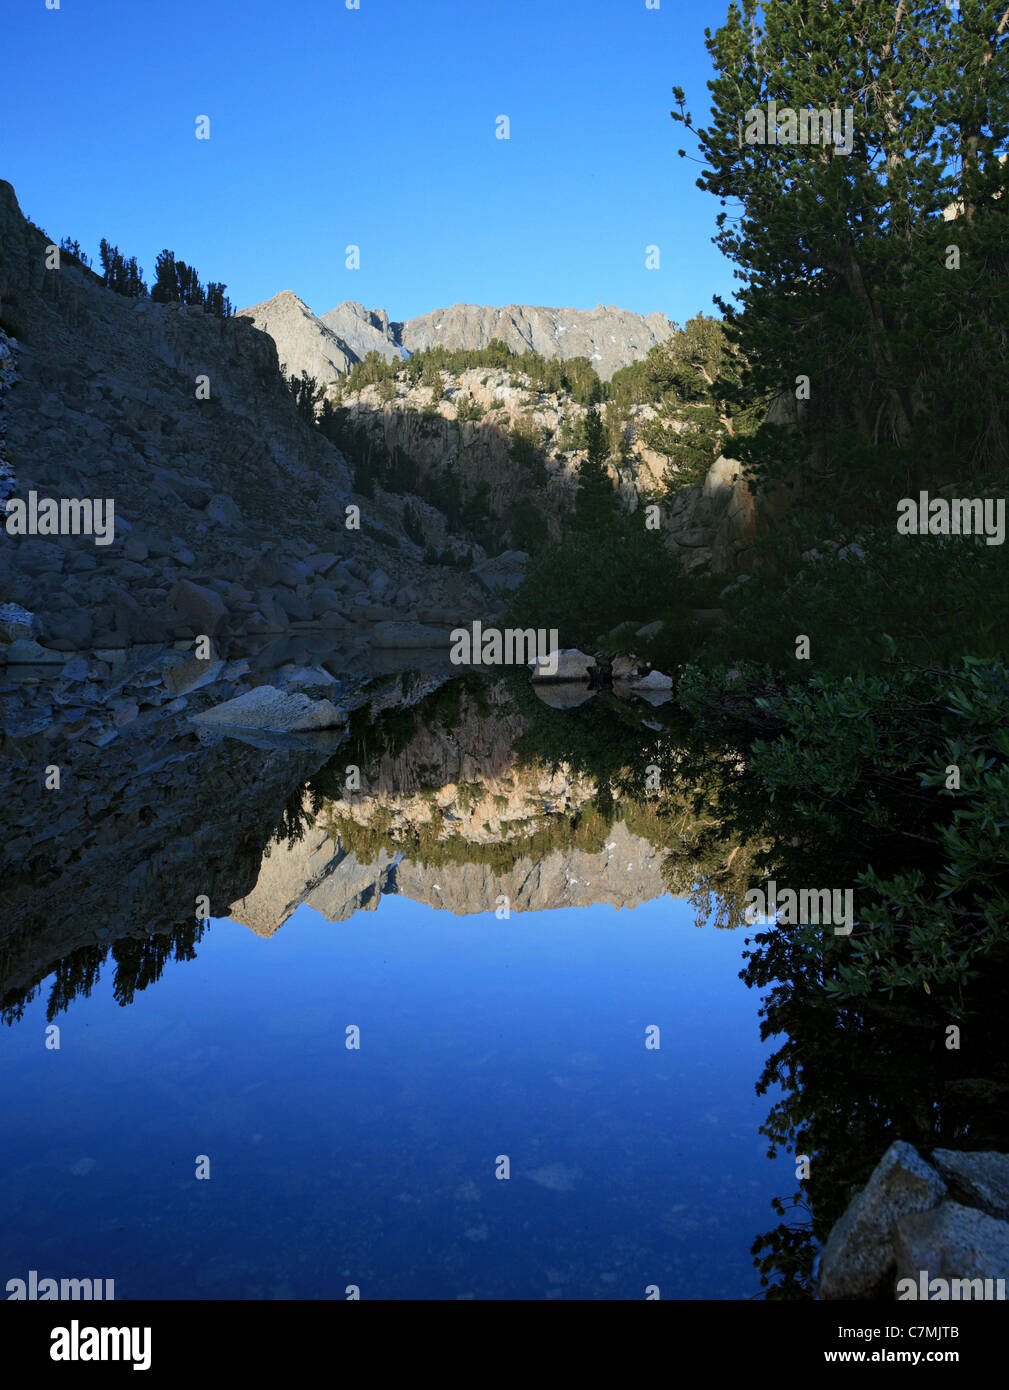 mountain reflection in a small pool in the Sierra Nevada mountains Stock Photo